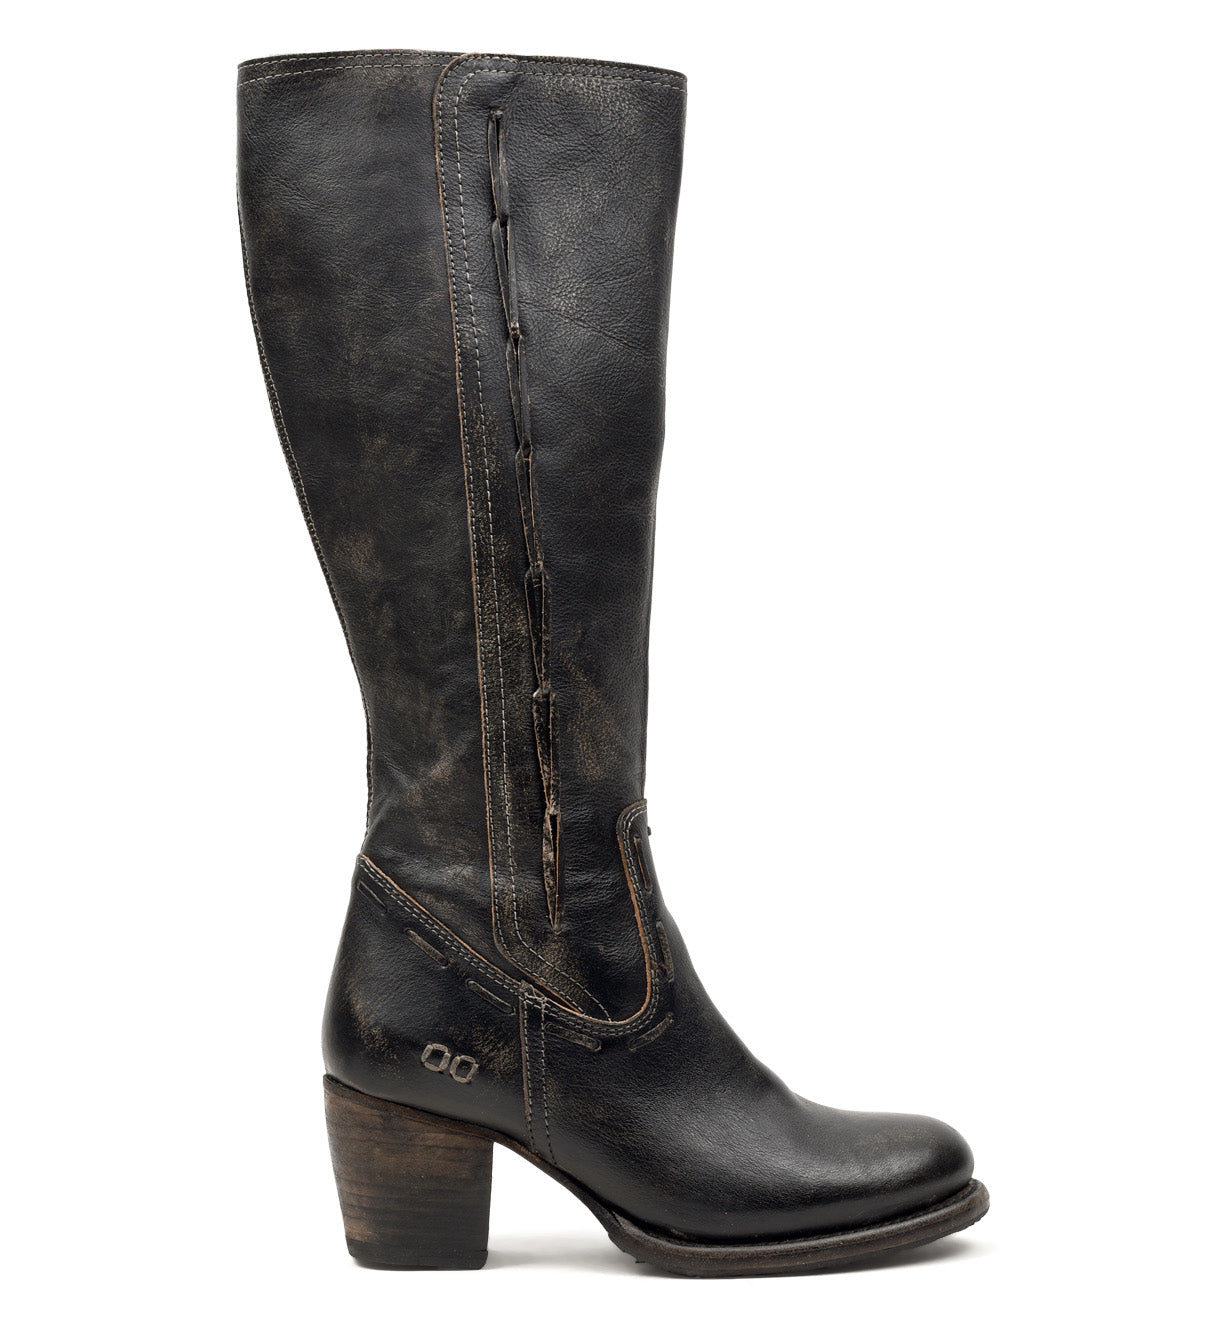 A women's black leather boot called Fate by Bed Stu.